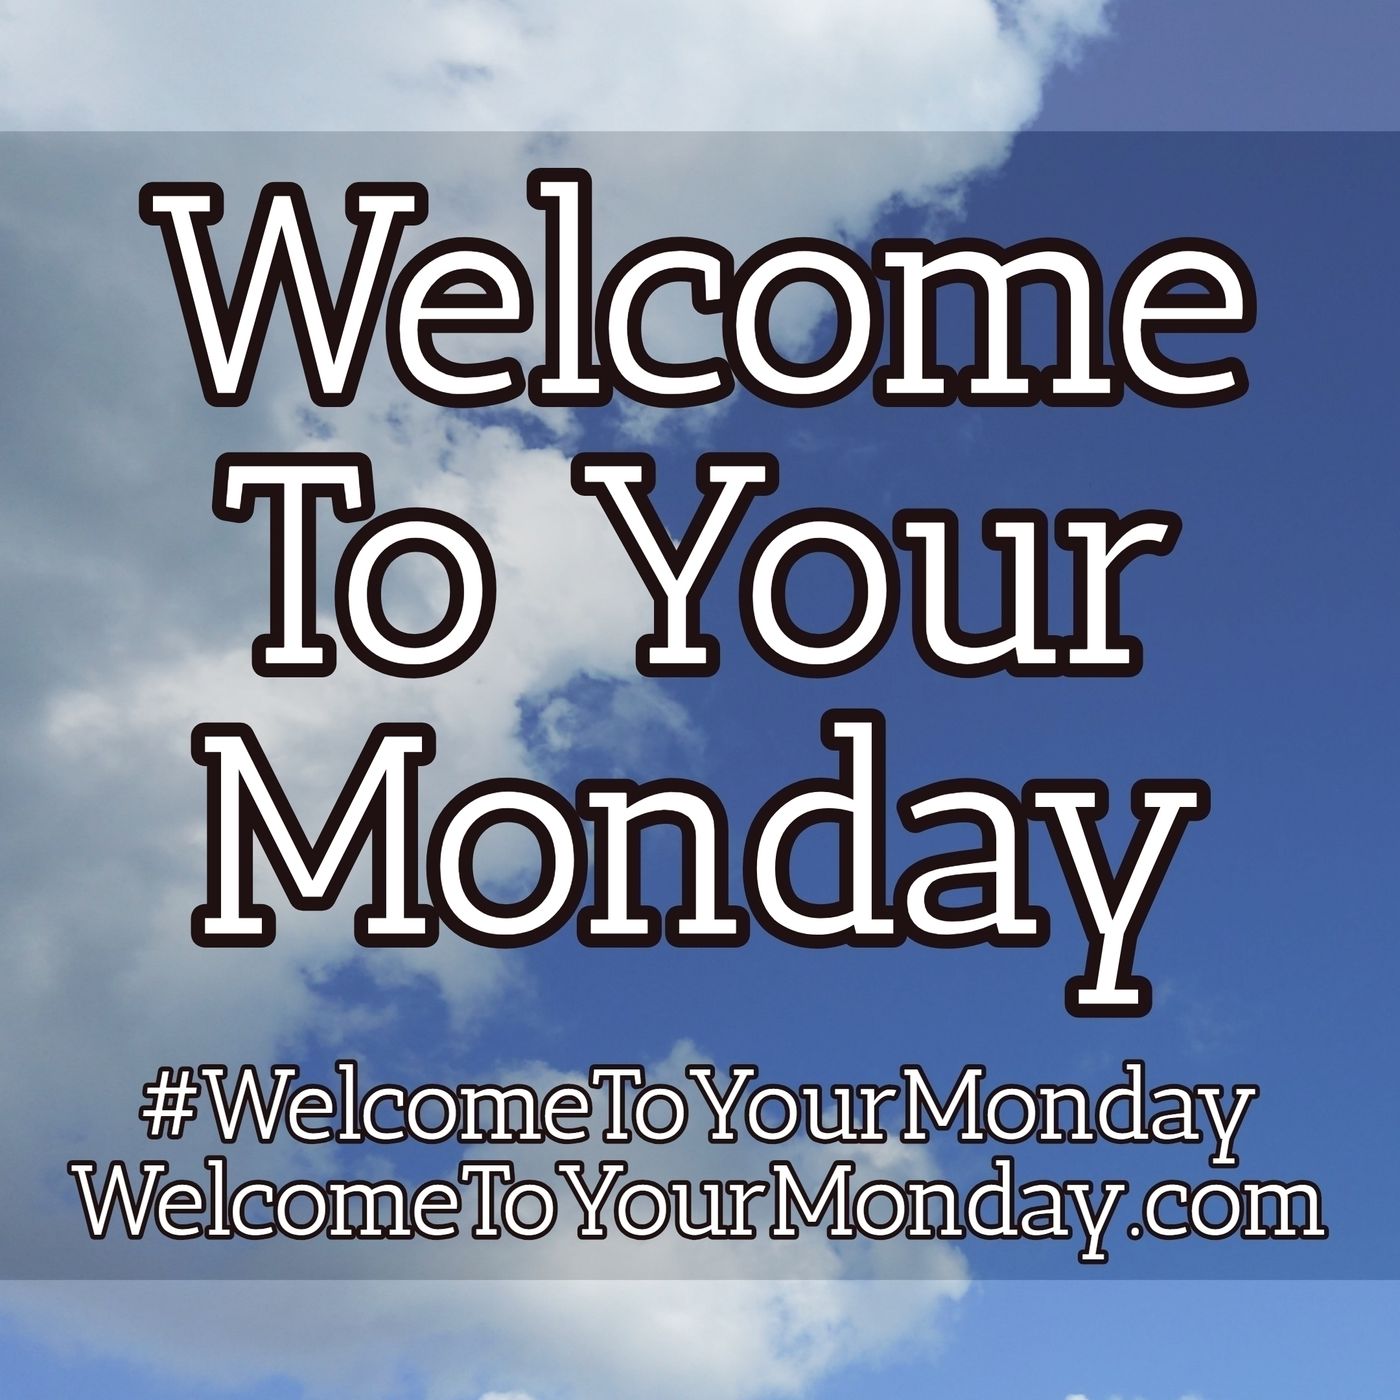 Welcome To Your Monday Message for 11/19/2018